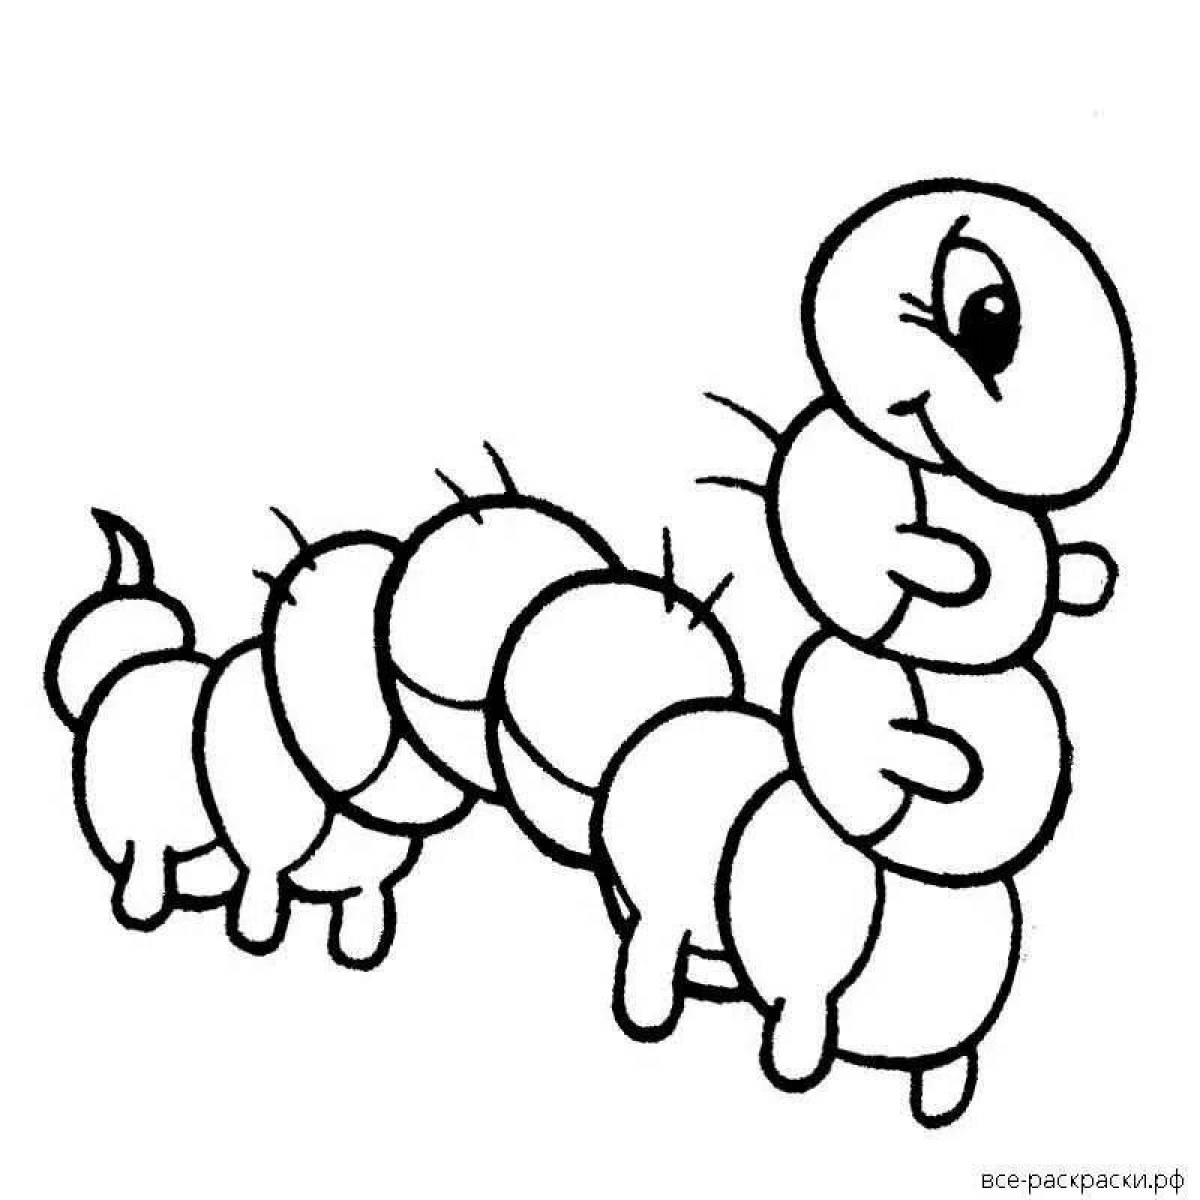 Fun caterpillar coloring book for 3-4 year olds